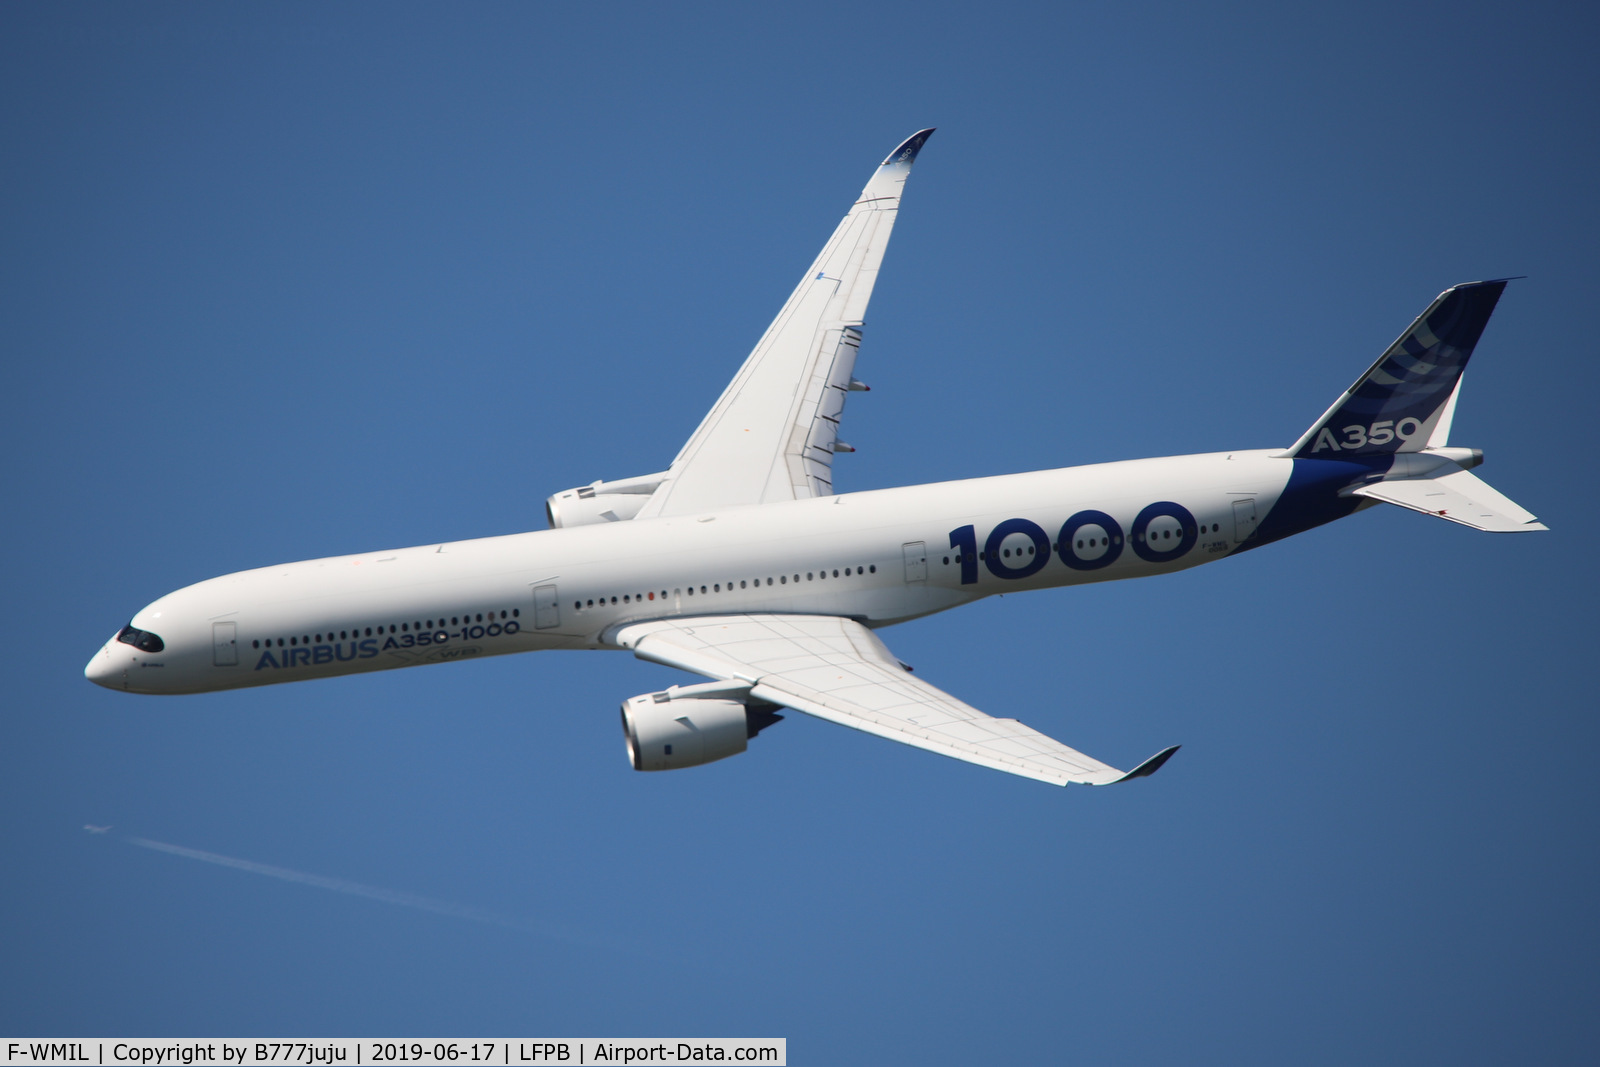 F-WMIL, 2016 Airbus A350-1041 C/N 059, at Le Bourget